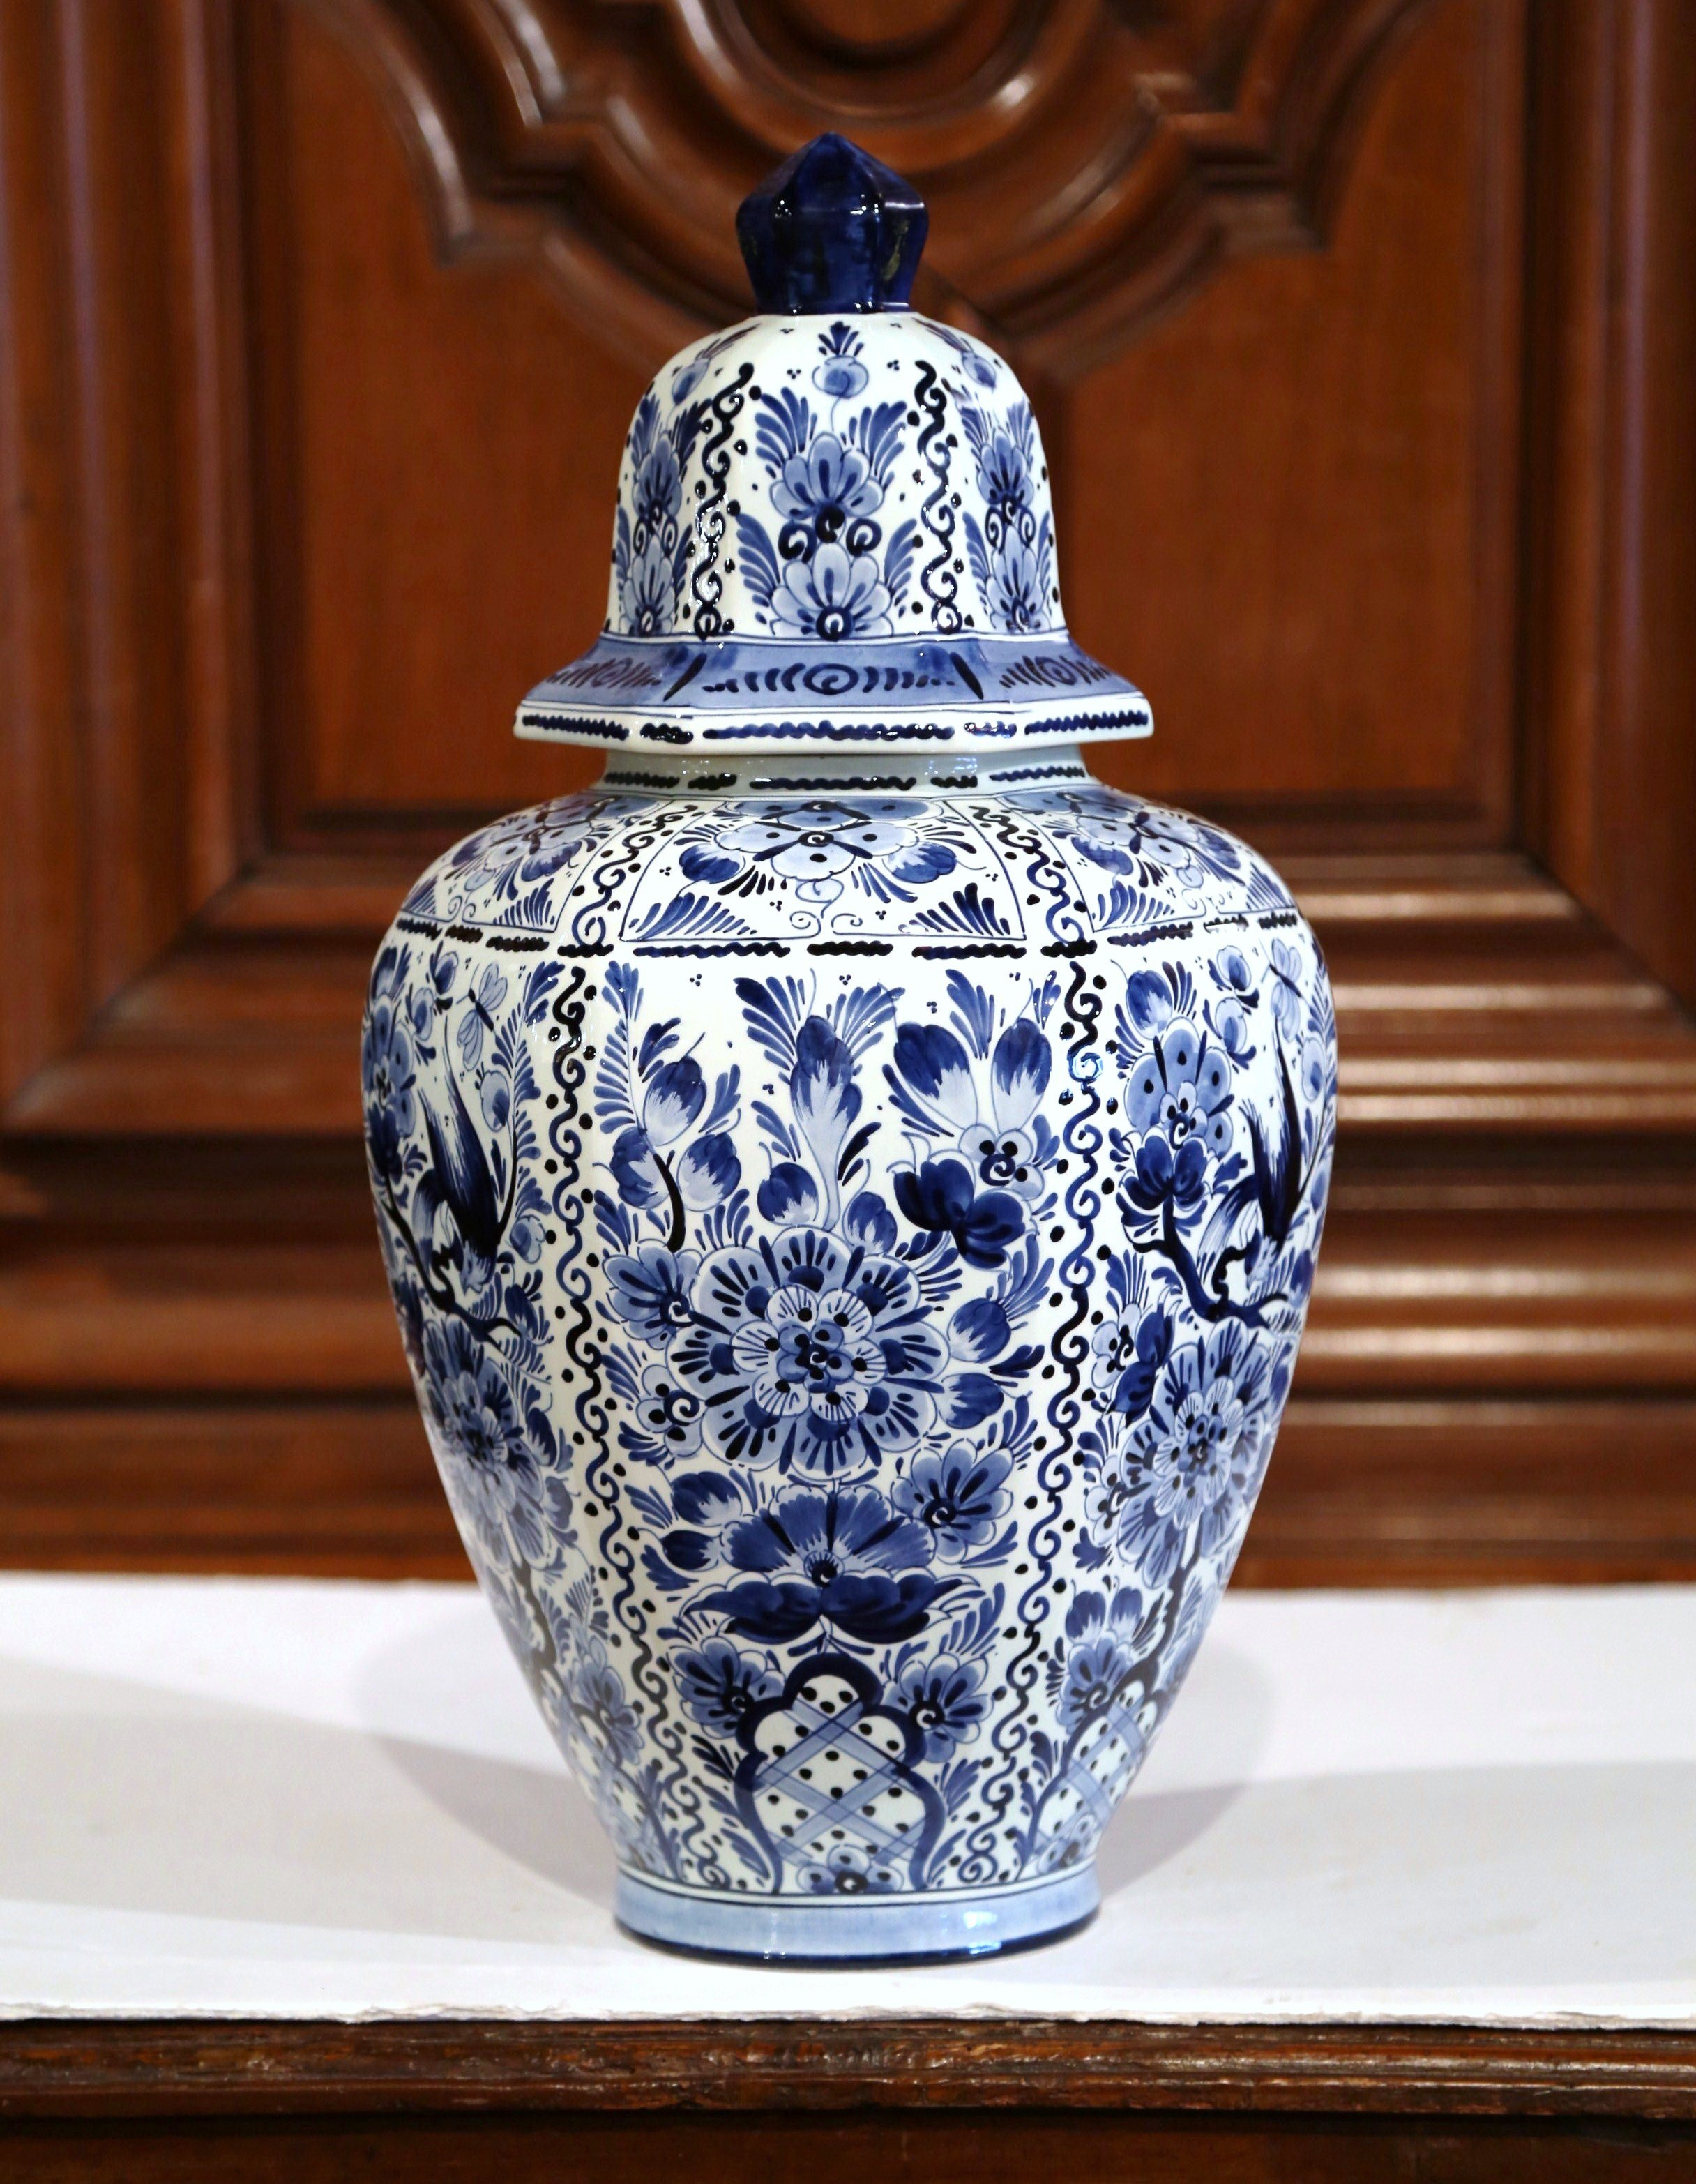 10 Popular Blue and White Decorative Vases 2024 free download blue and white decorative vases of large mid 20th century dutch blue and white faience delft ginger jar inside large mid 20th century dutch blue and white faience delft ginger jar with top a